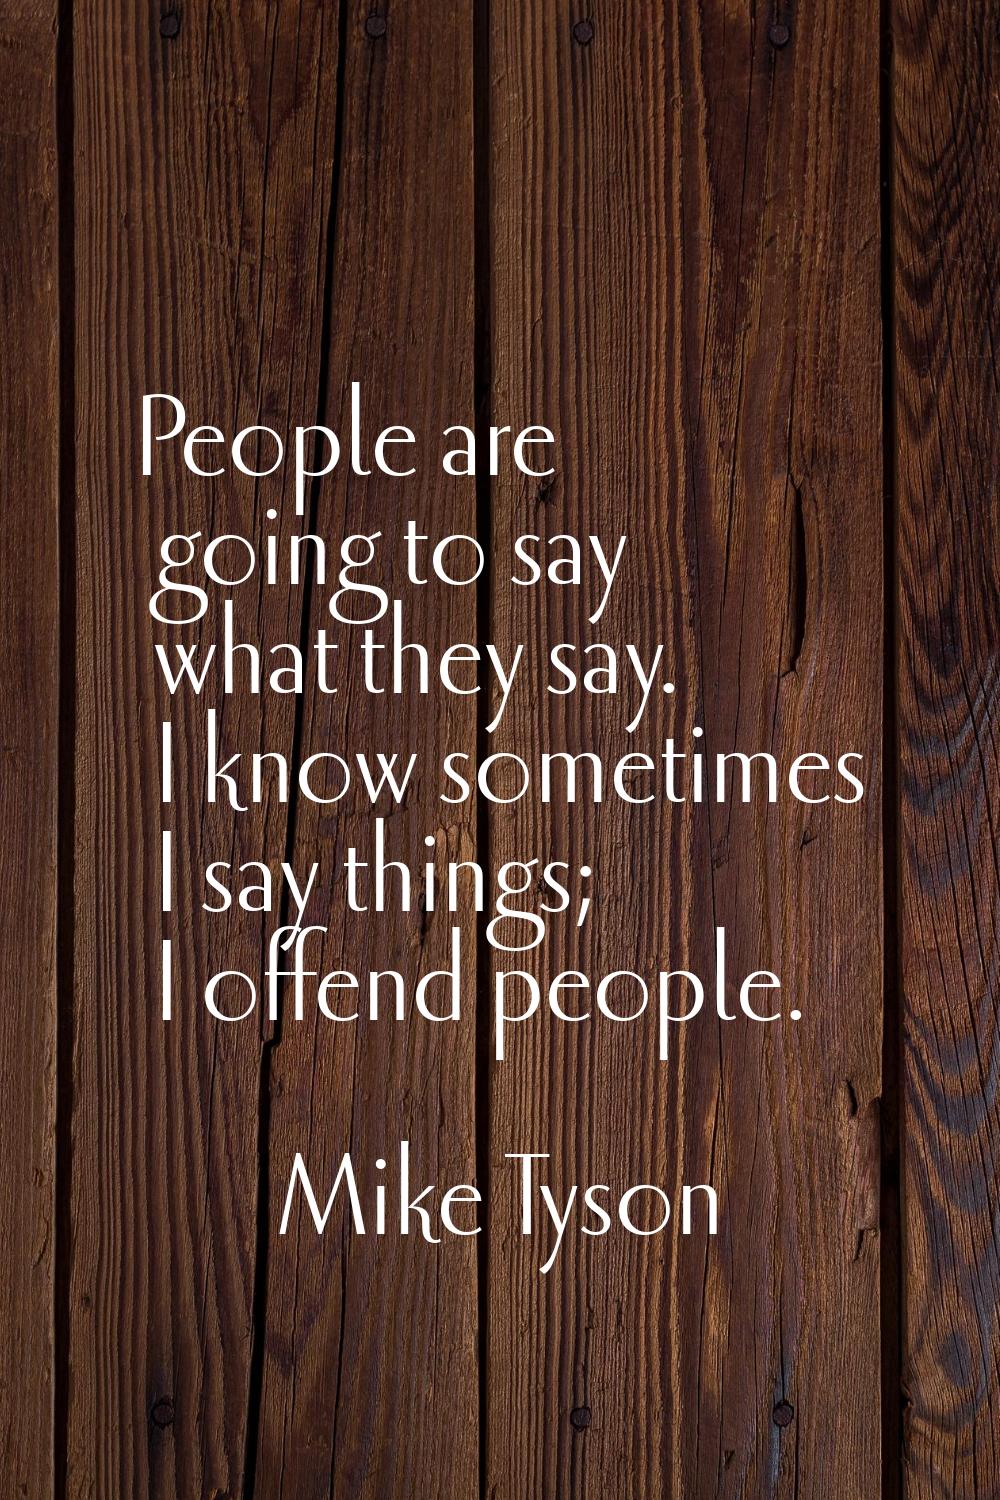 People are going to say what they say. I know sometimes I say things; I offend people.